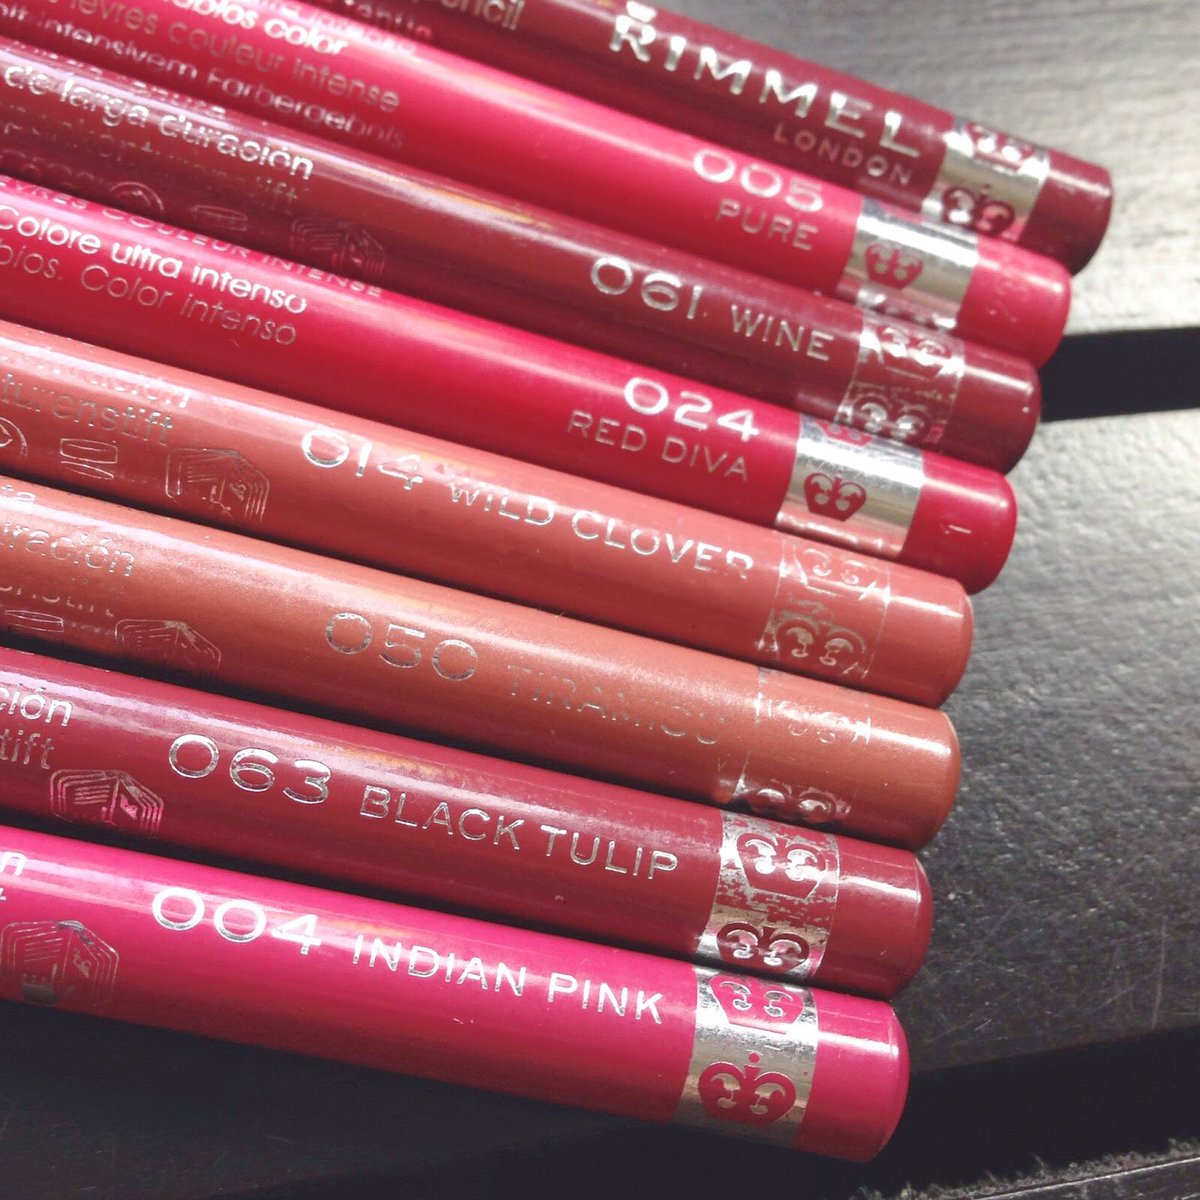 I feel like the Rimmel London Exaggerate lip liners don't get enough c...